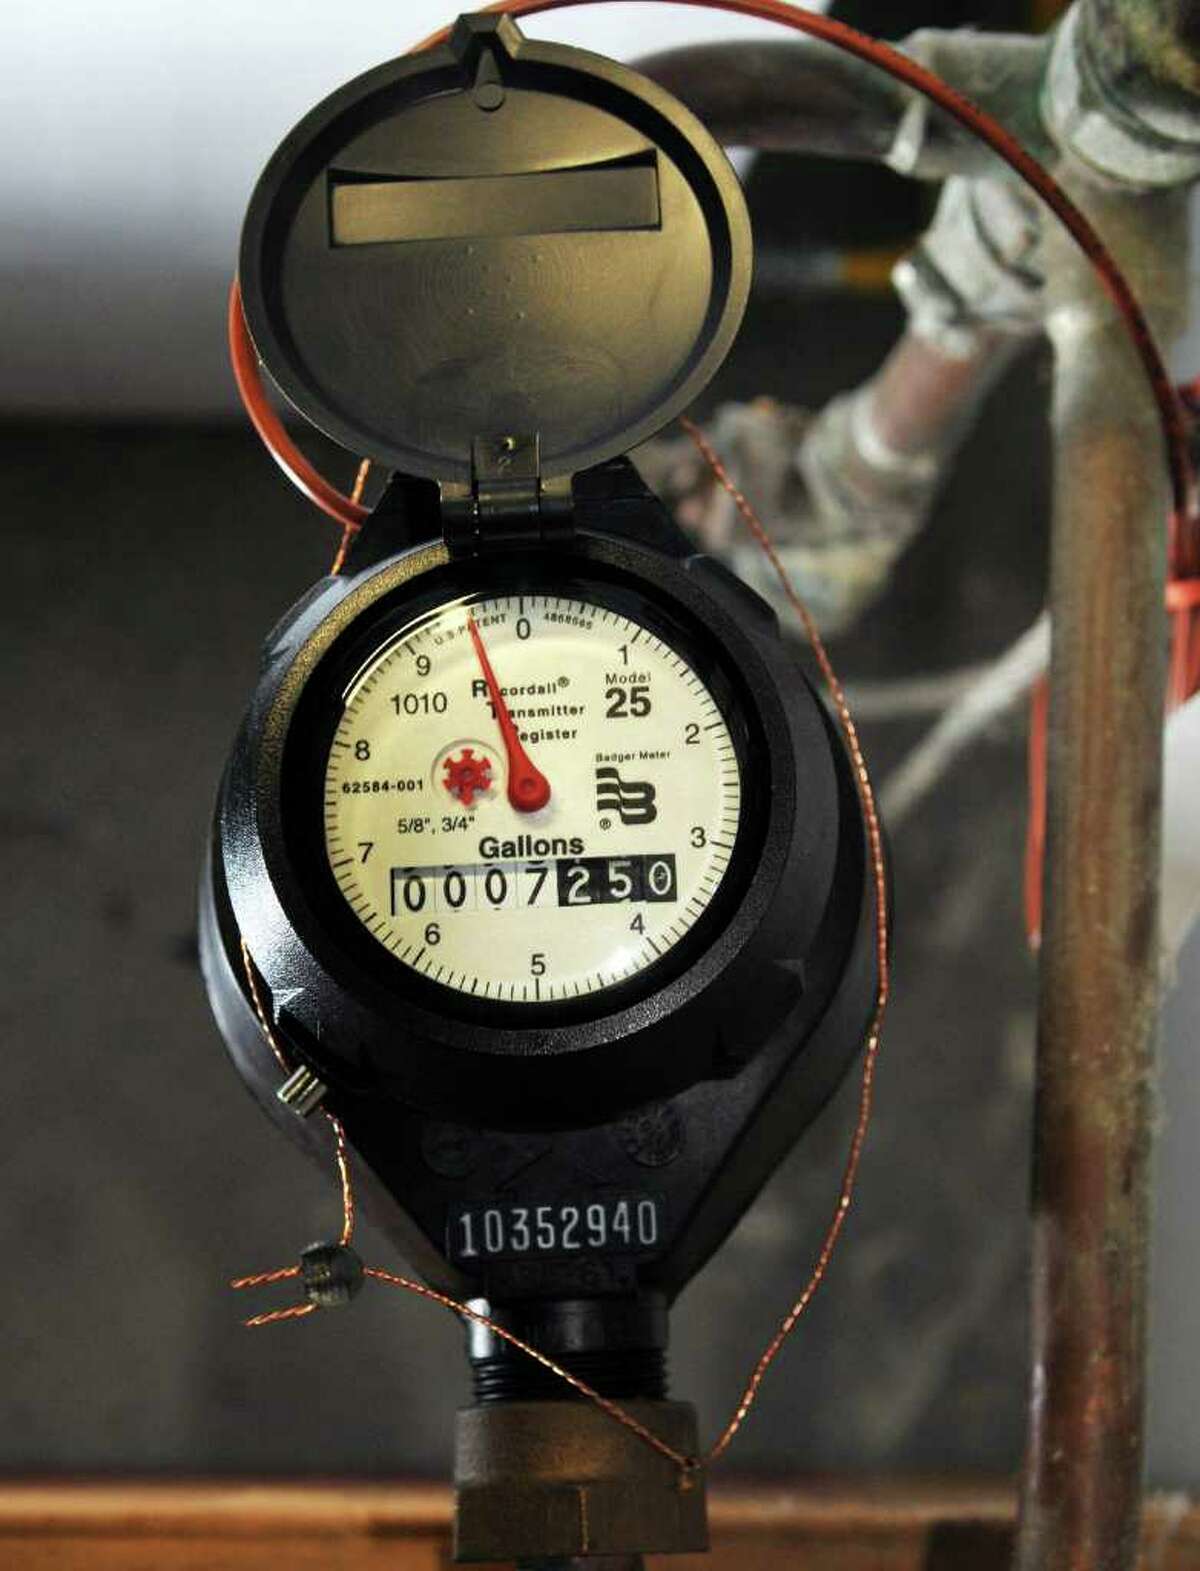 New water meter in the basement of Eugene Booth's Troy home Thursday morning January 27, 2011. (John Carl D'Annibale / Times Union)